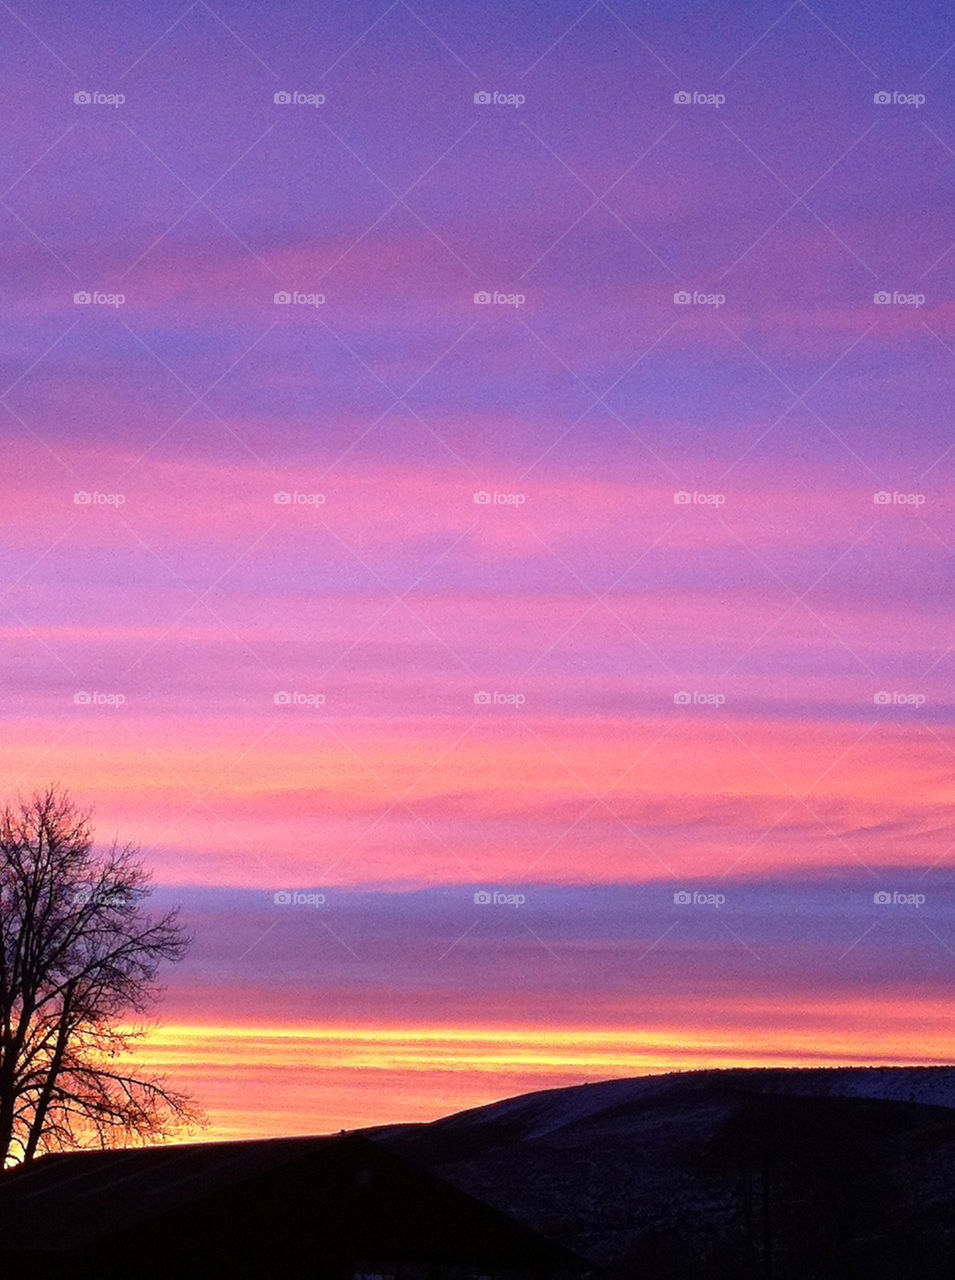 Sunrise in pink and purple